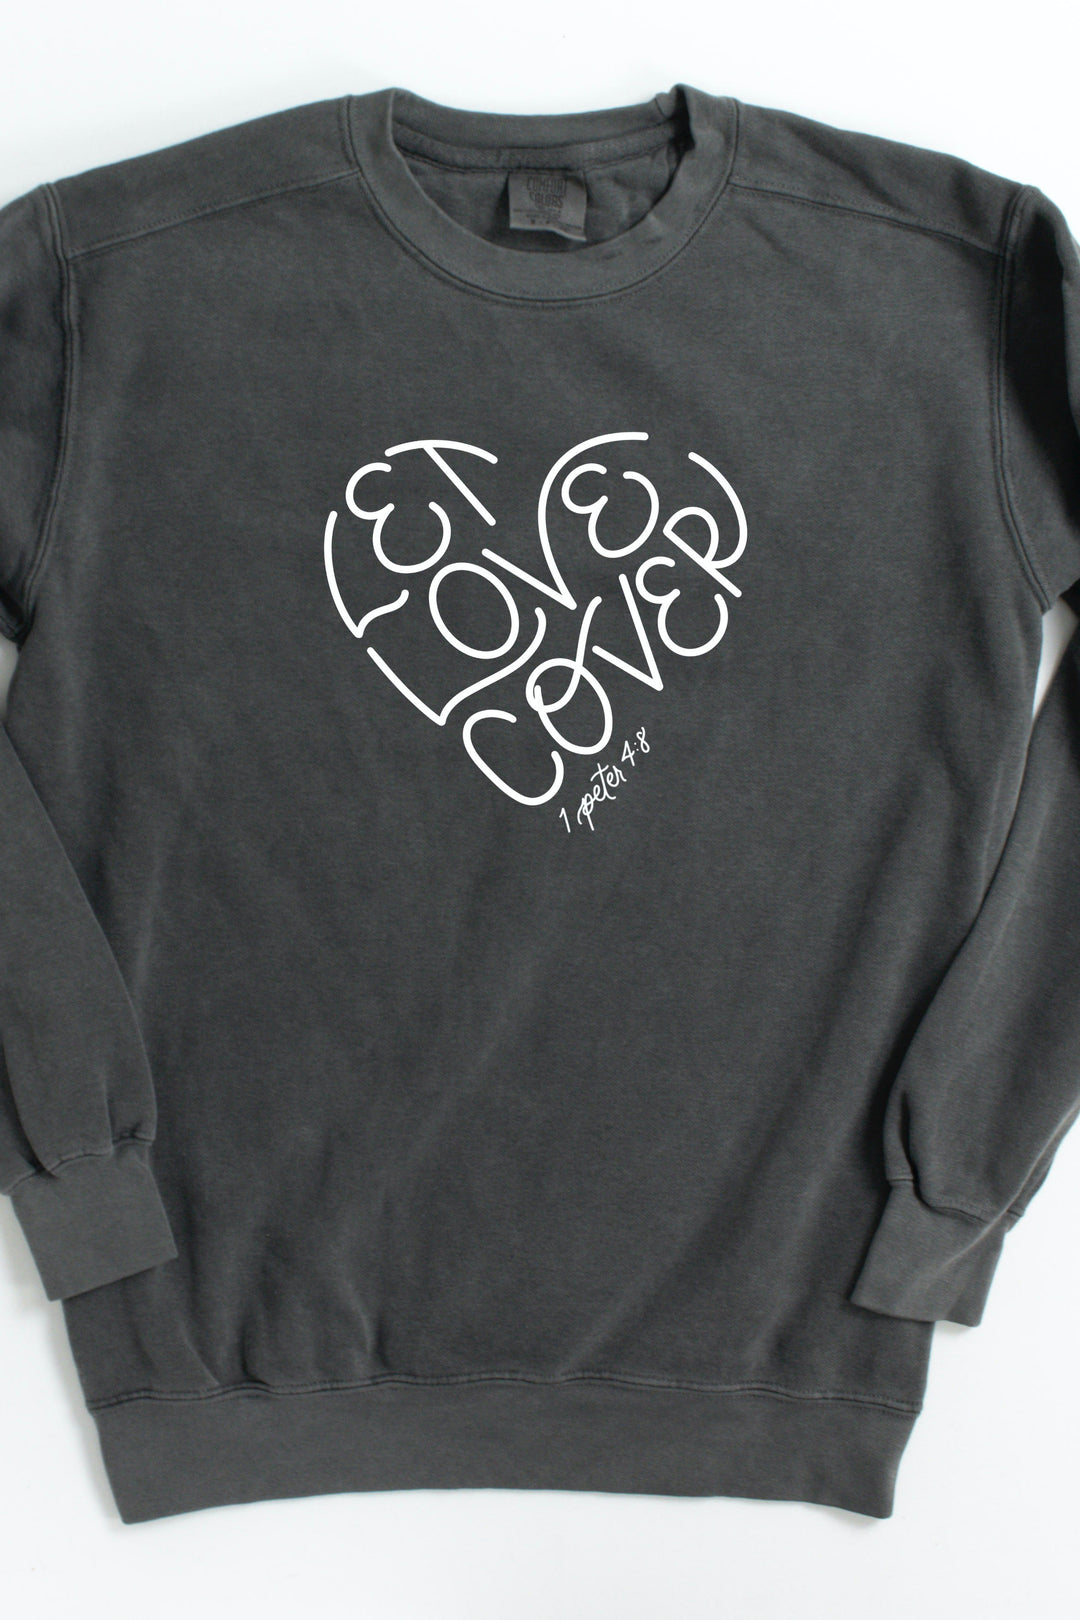 "Let Love Cover" Crewneck Pullover